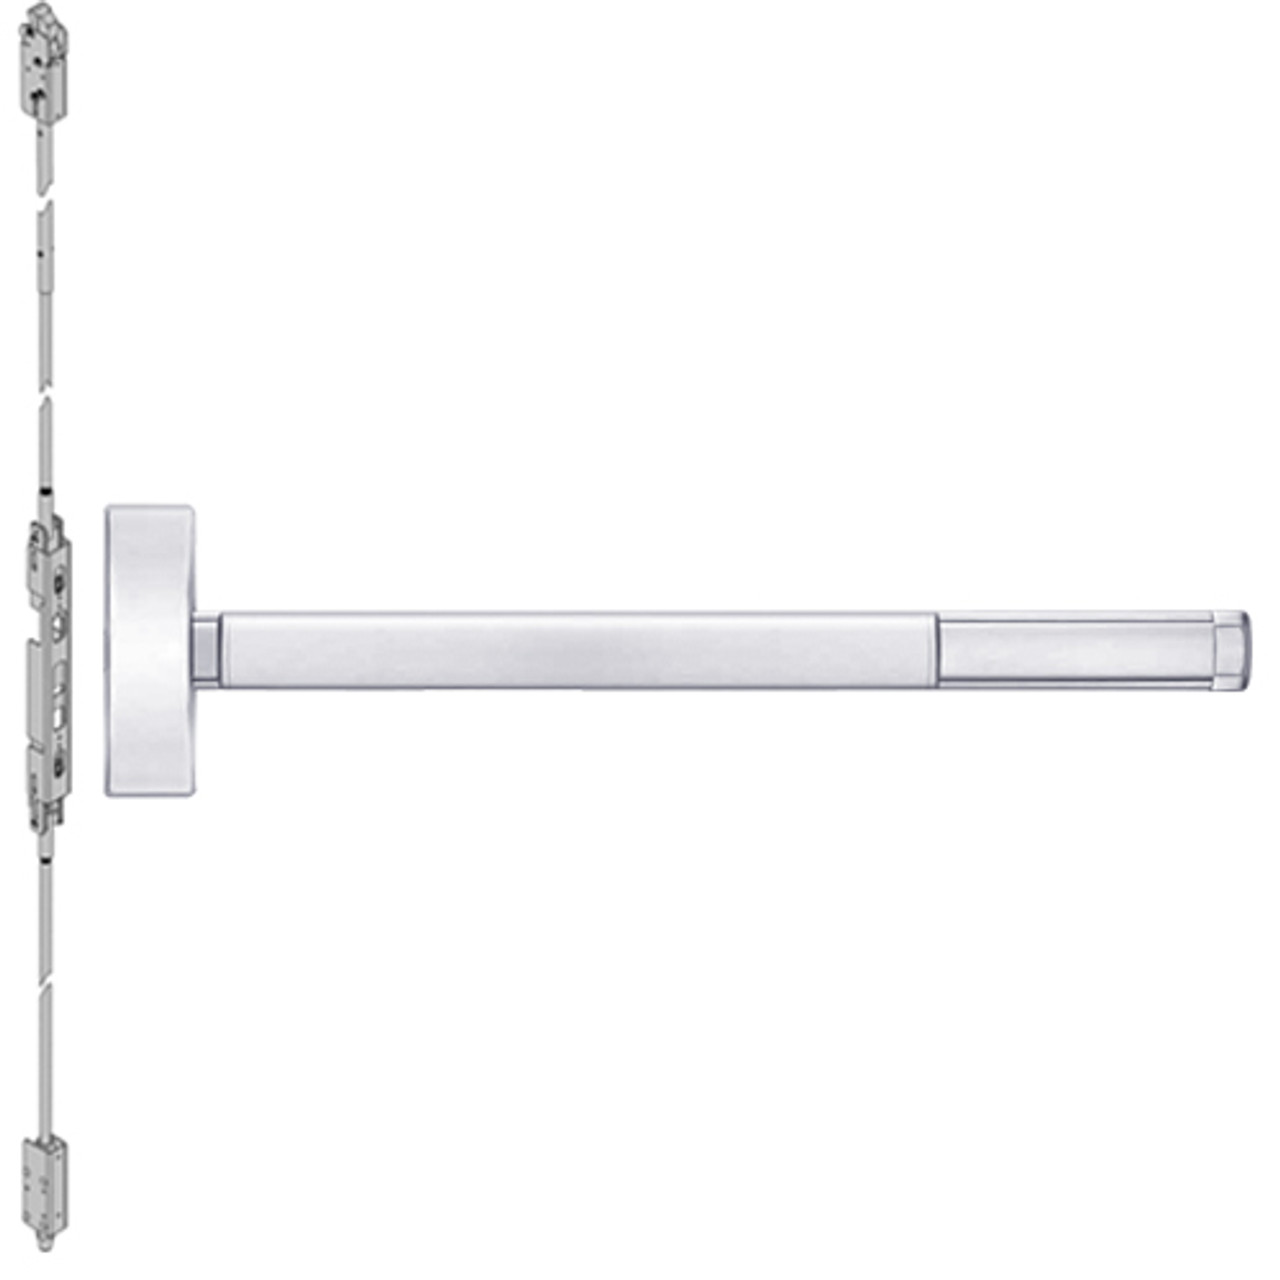 ELRFL2814-625-36 PHI 2800 Series Fire Rated Concealed Vertical Rod Exit Device with Electric Latch Retraction Prepped for Lever-Knob Always Active in Bright Chrome Finish